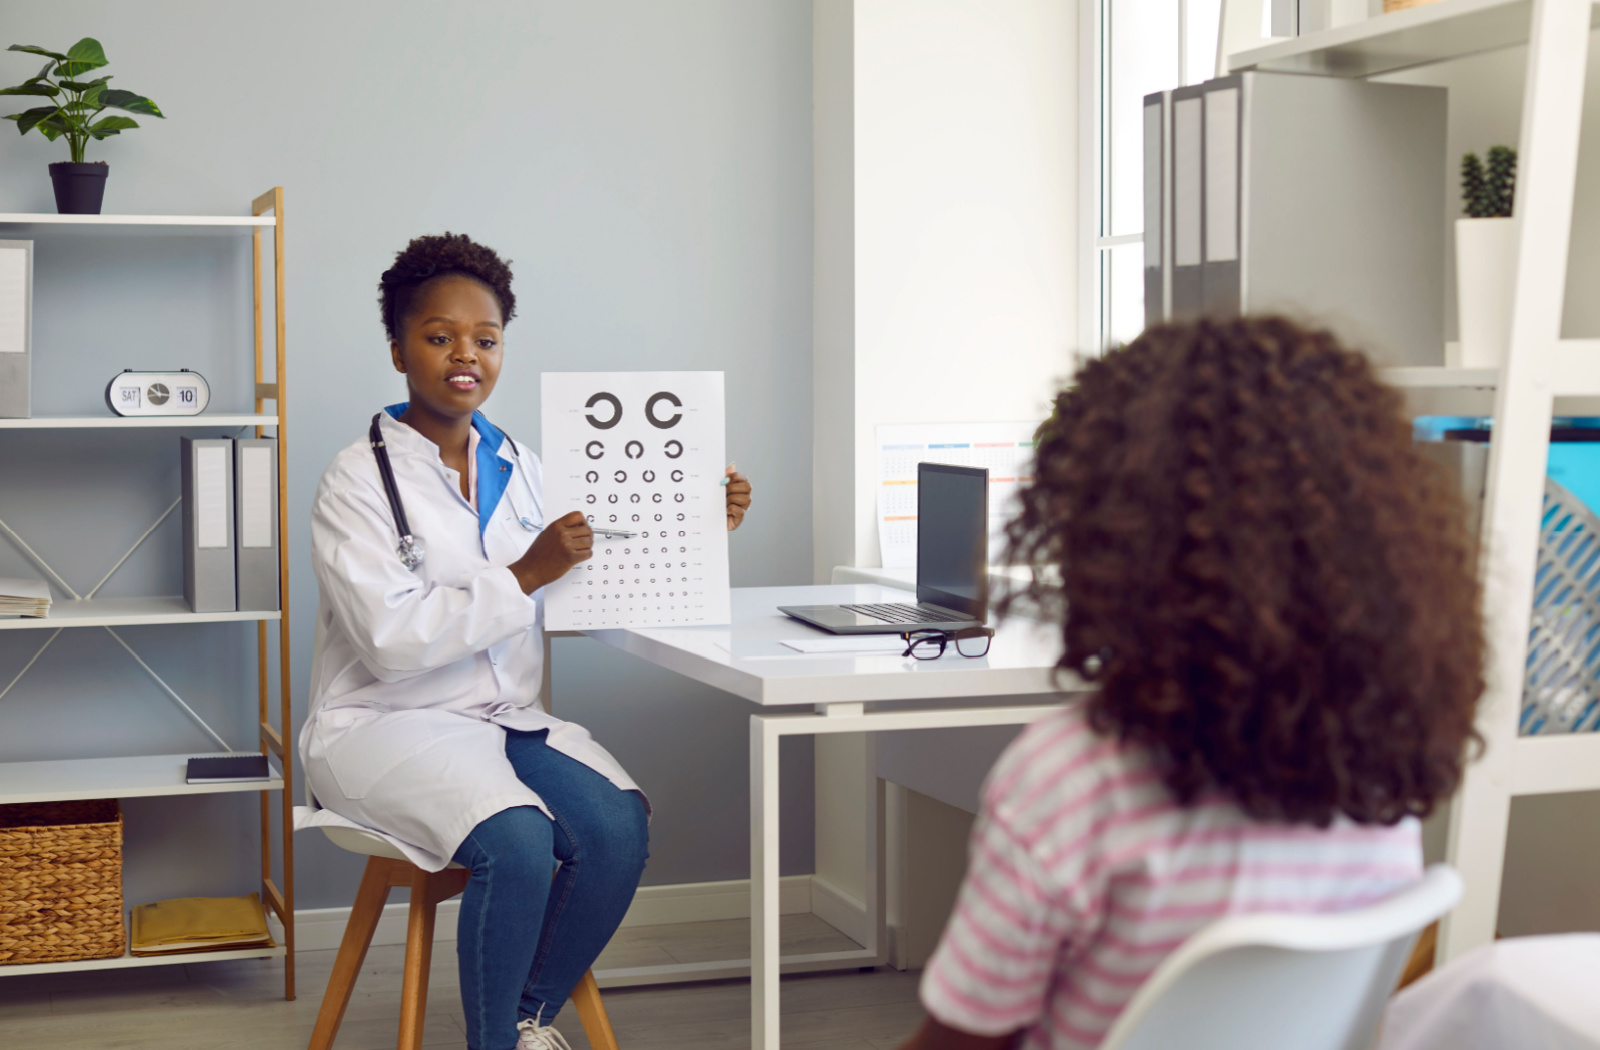 An eye doctor tests a young patient's eyesight with the Landolt C eye chart.